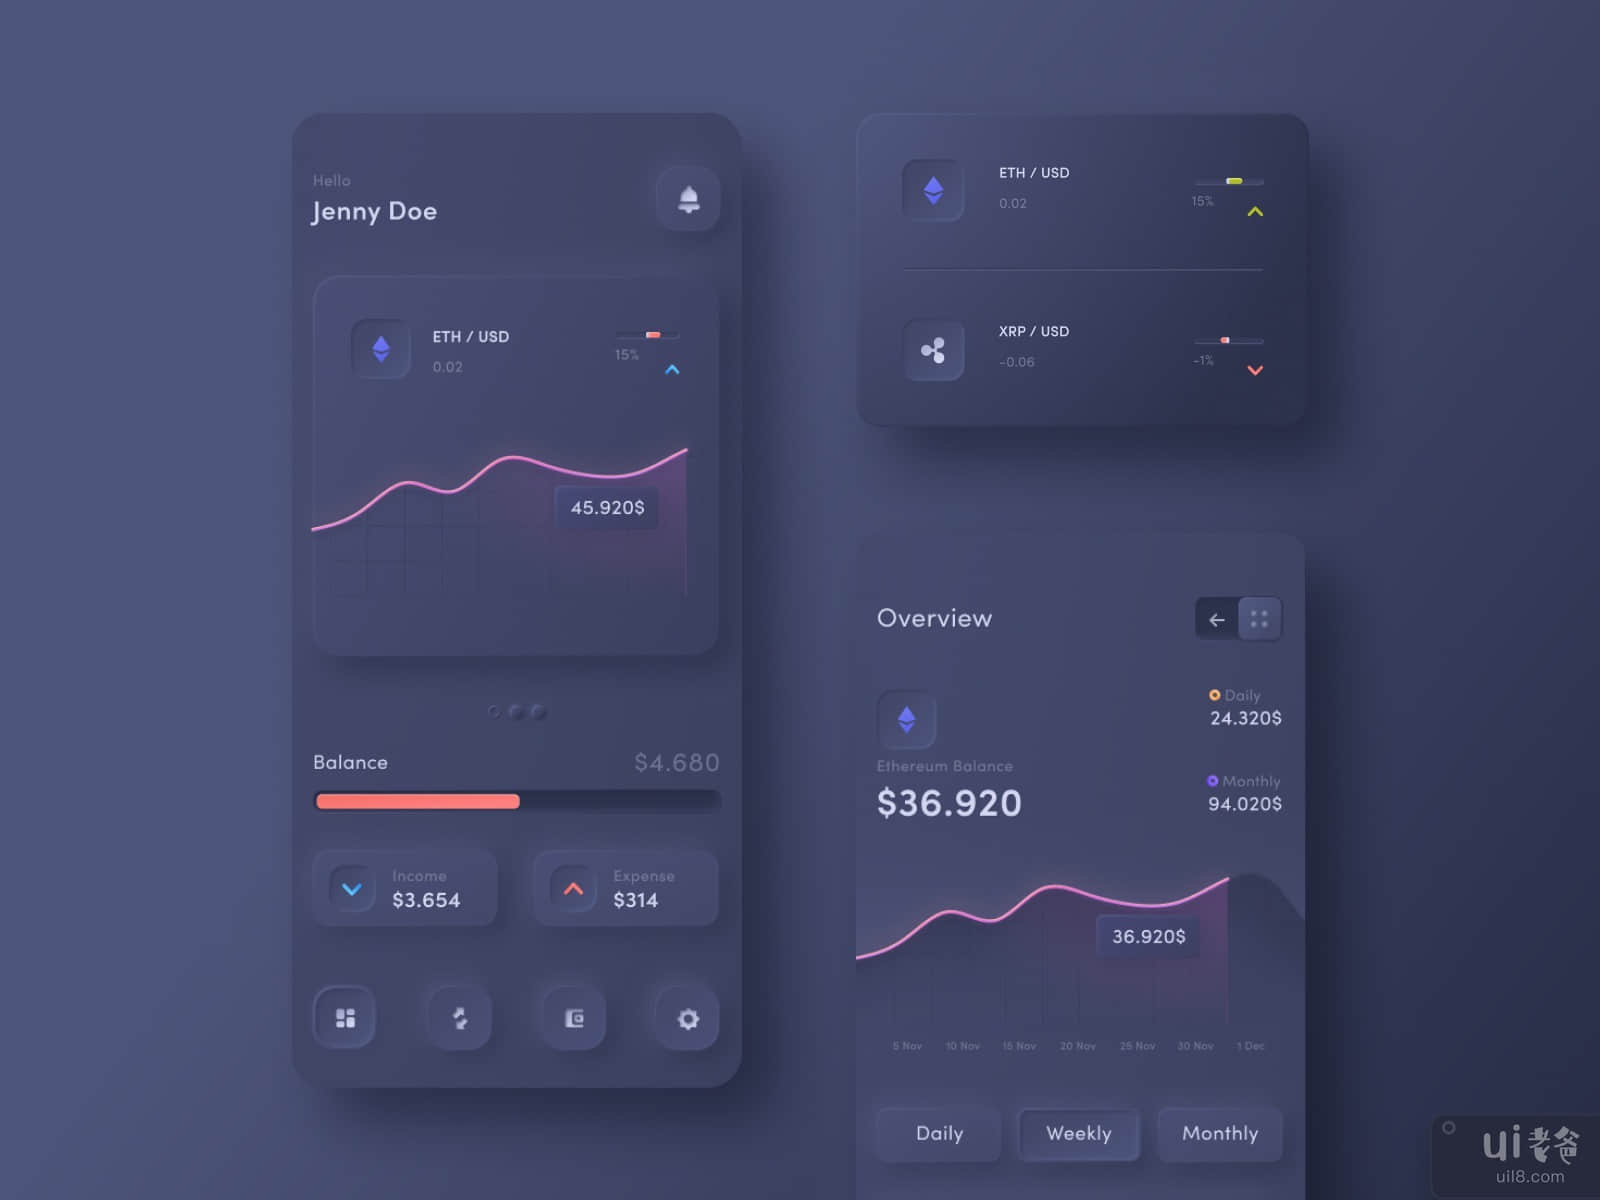 Dashboard Cryptocurrency